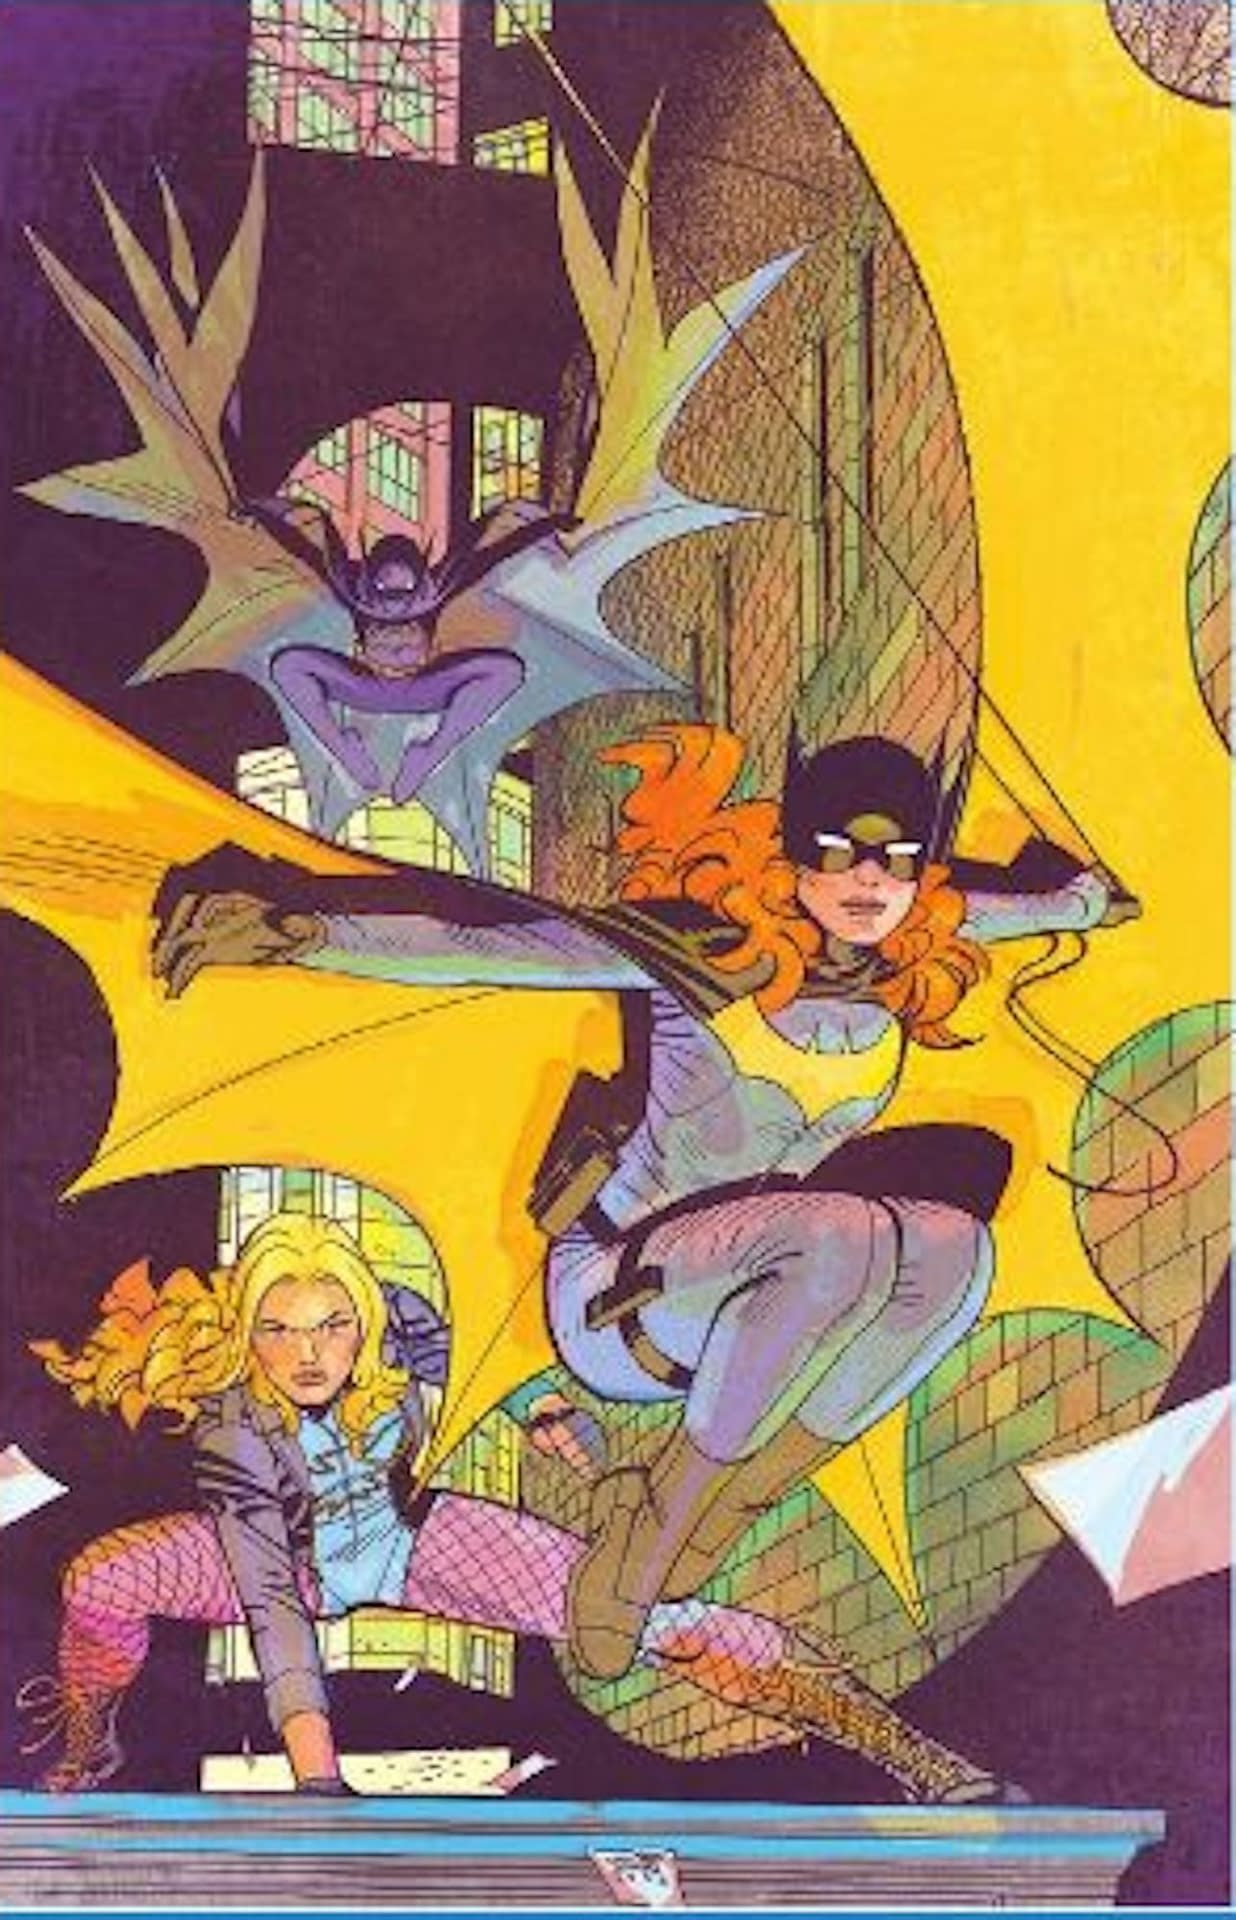 Birds of Prey #2 - But Why Tho?